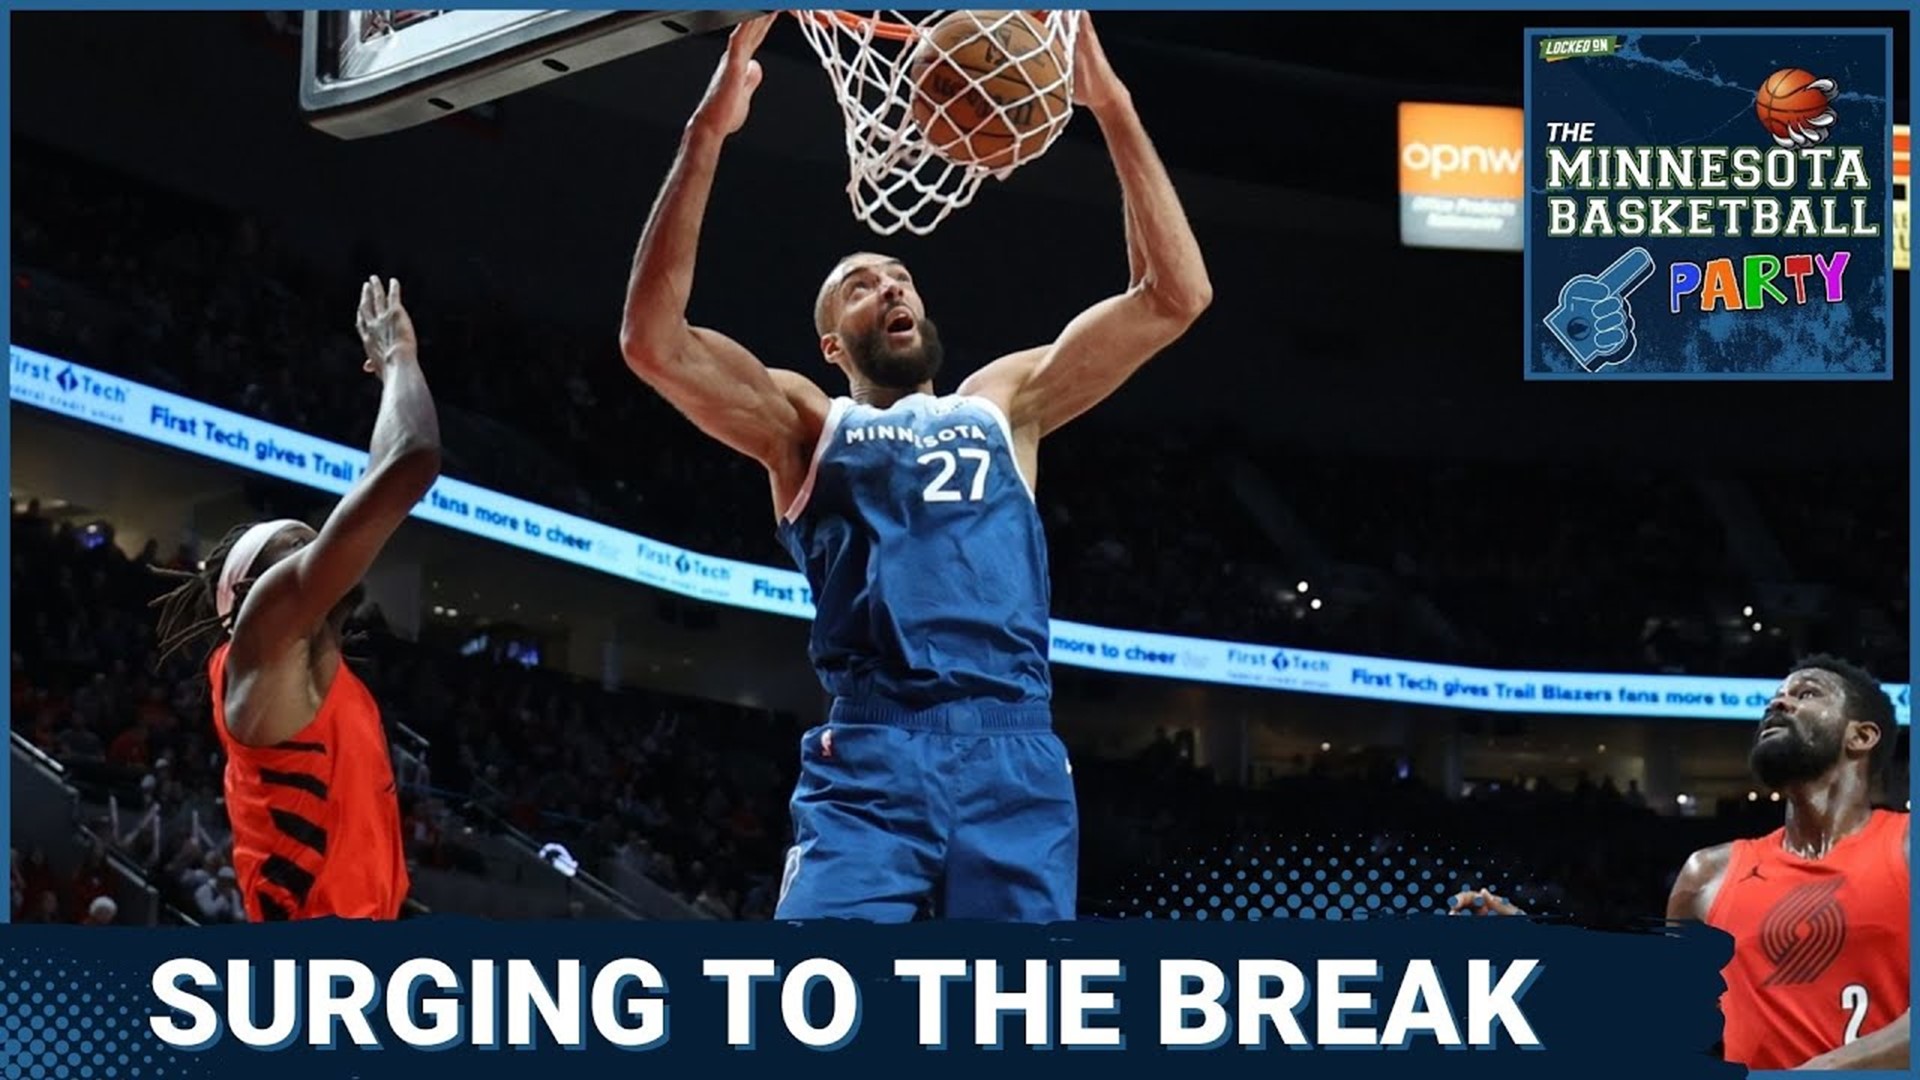 The Minnesota Timberwolves Are SURGING Into the All-Star Break - The Minnesota Basketball Party